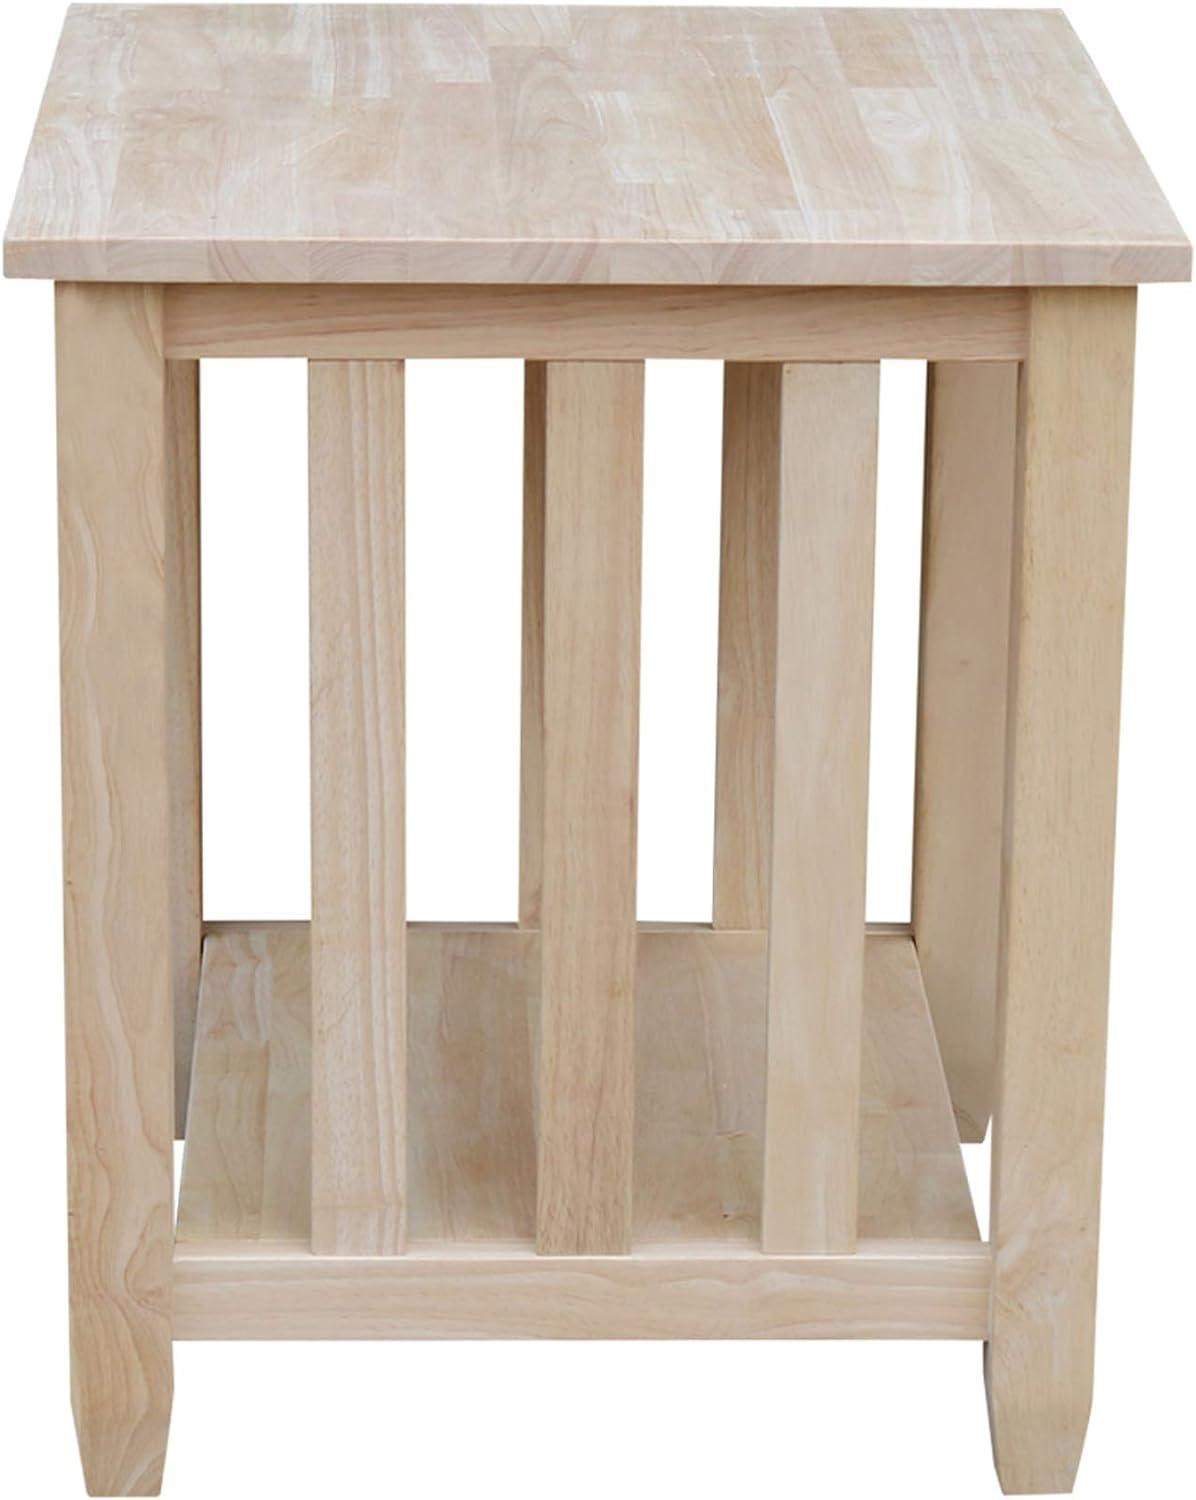 Classic Mission Tall Unfinished Solid Wood End Table